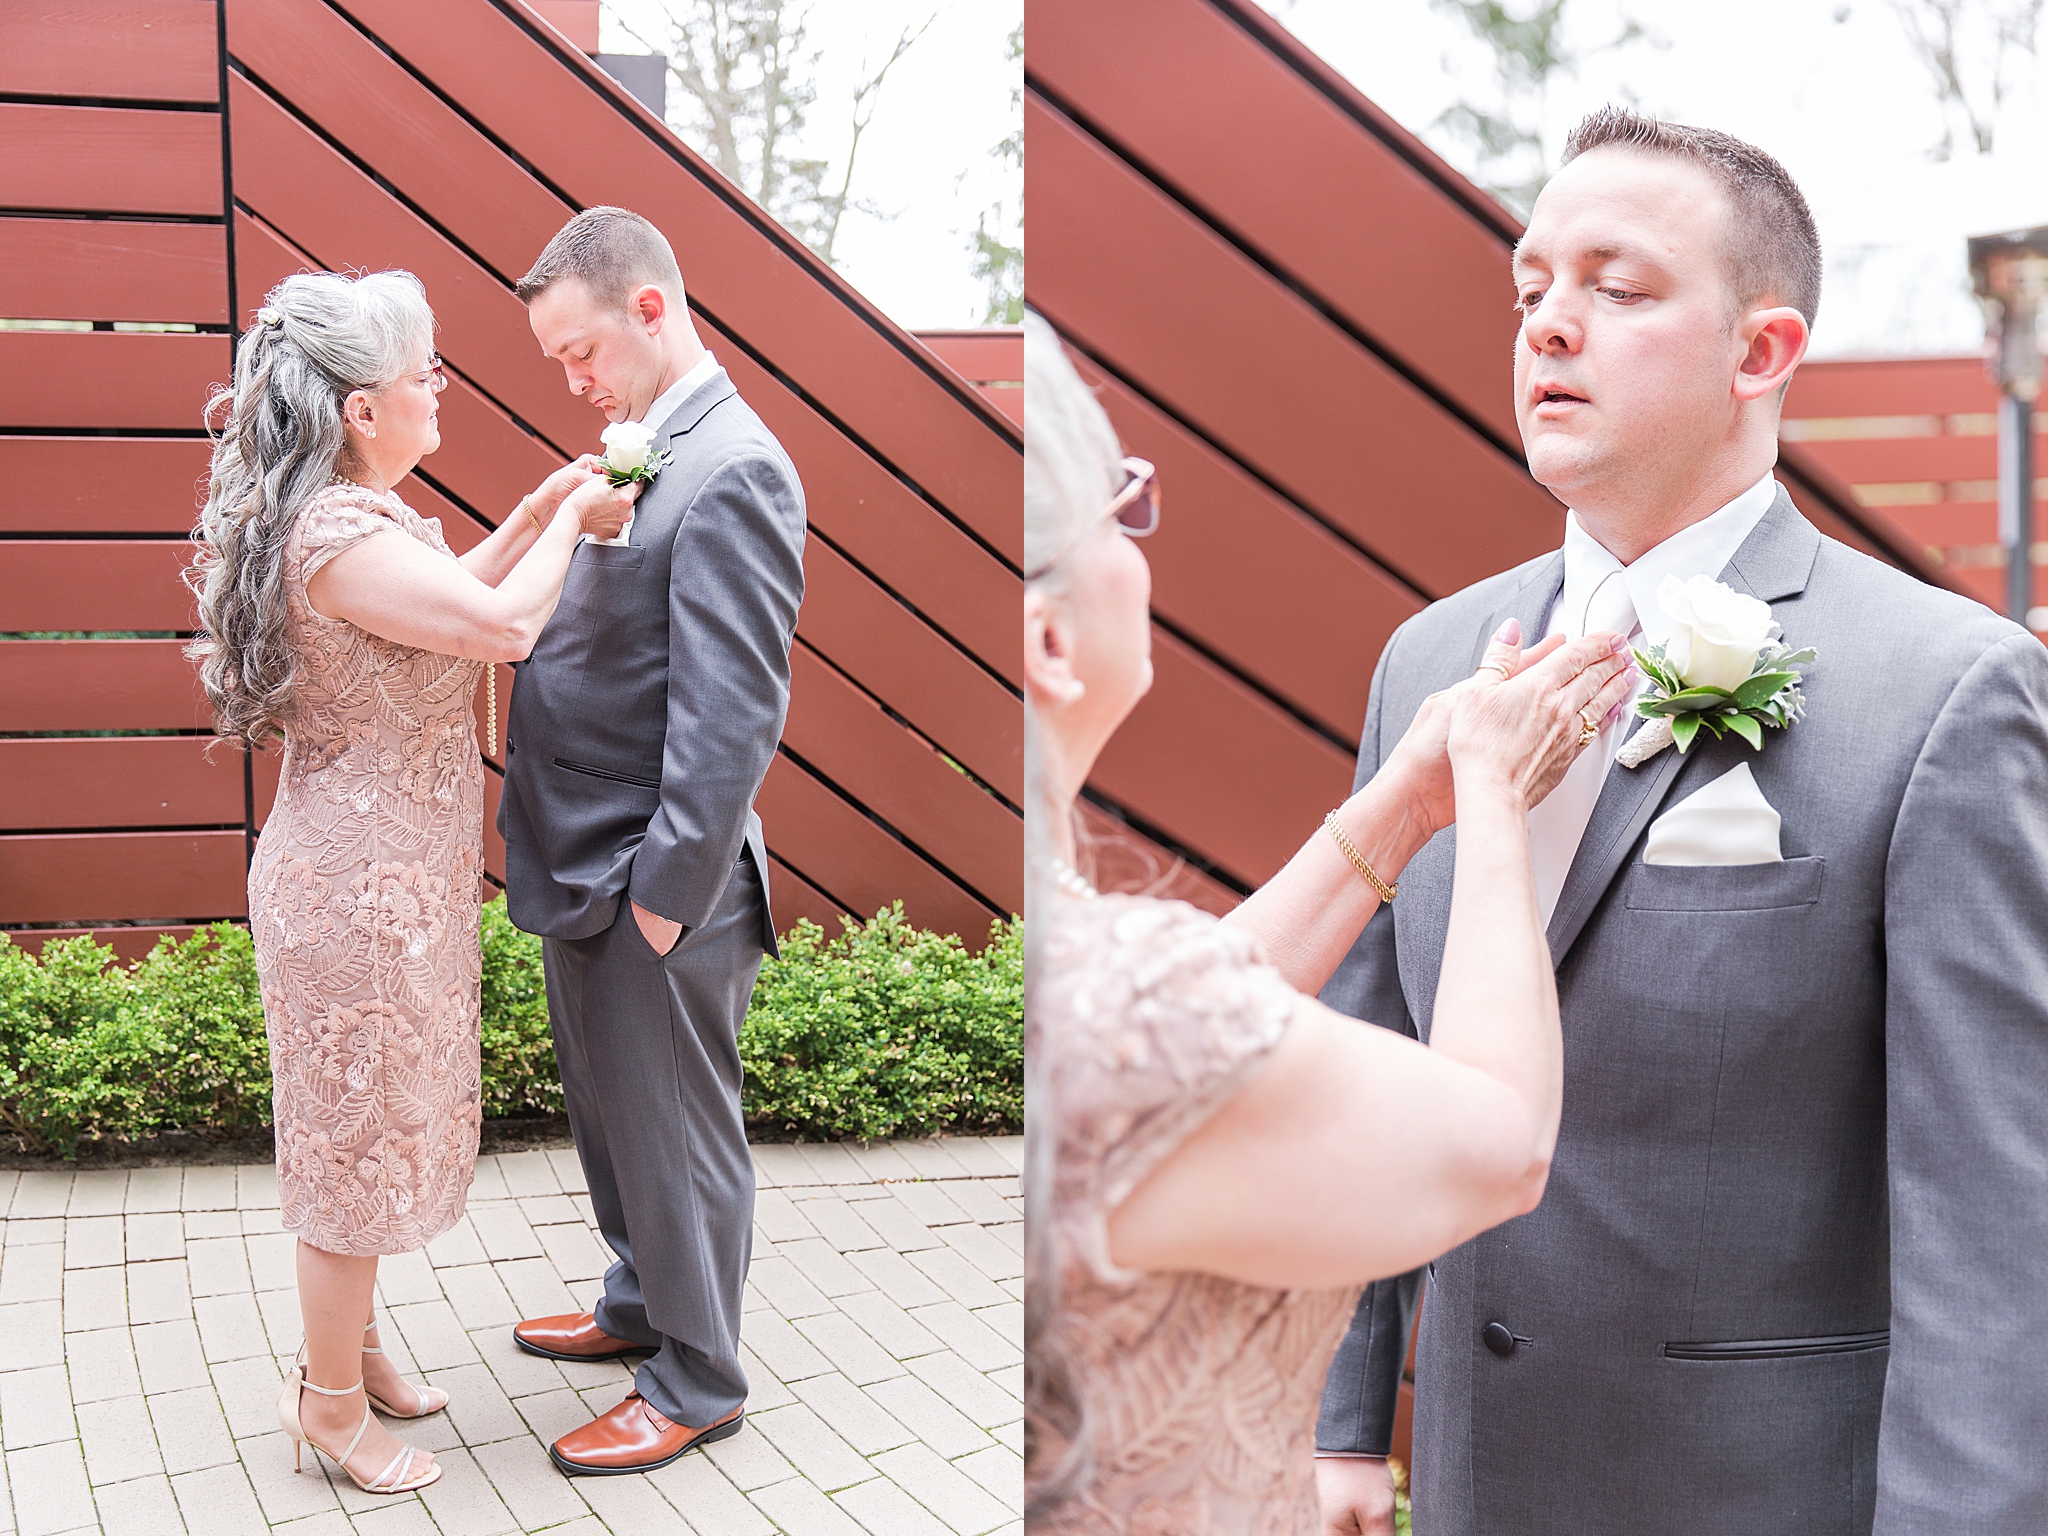 modern-romantic-wedding-photography-at-webers-in-ann-arbor-michigan-by-courtney-carolyn-photography_0017.jpg